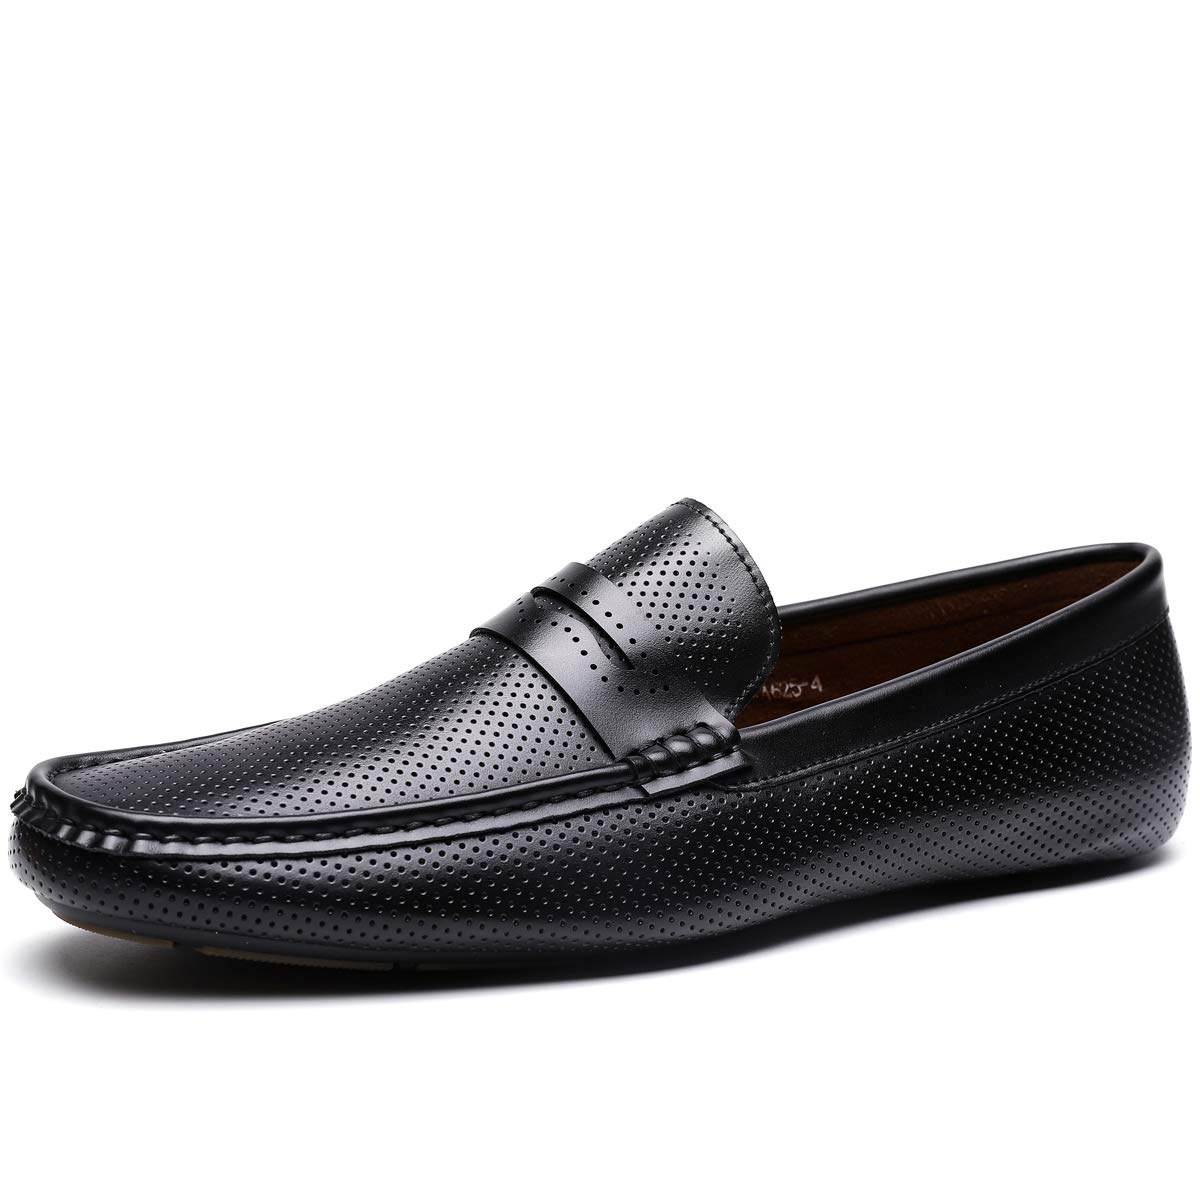 Baronero Mens Casual Loafers for Men Slip-on Driving Loafers Shoes Walking Shoes 